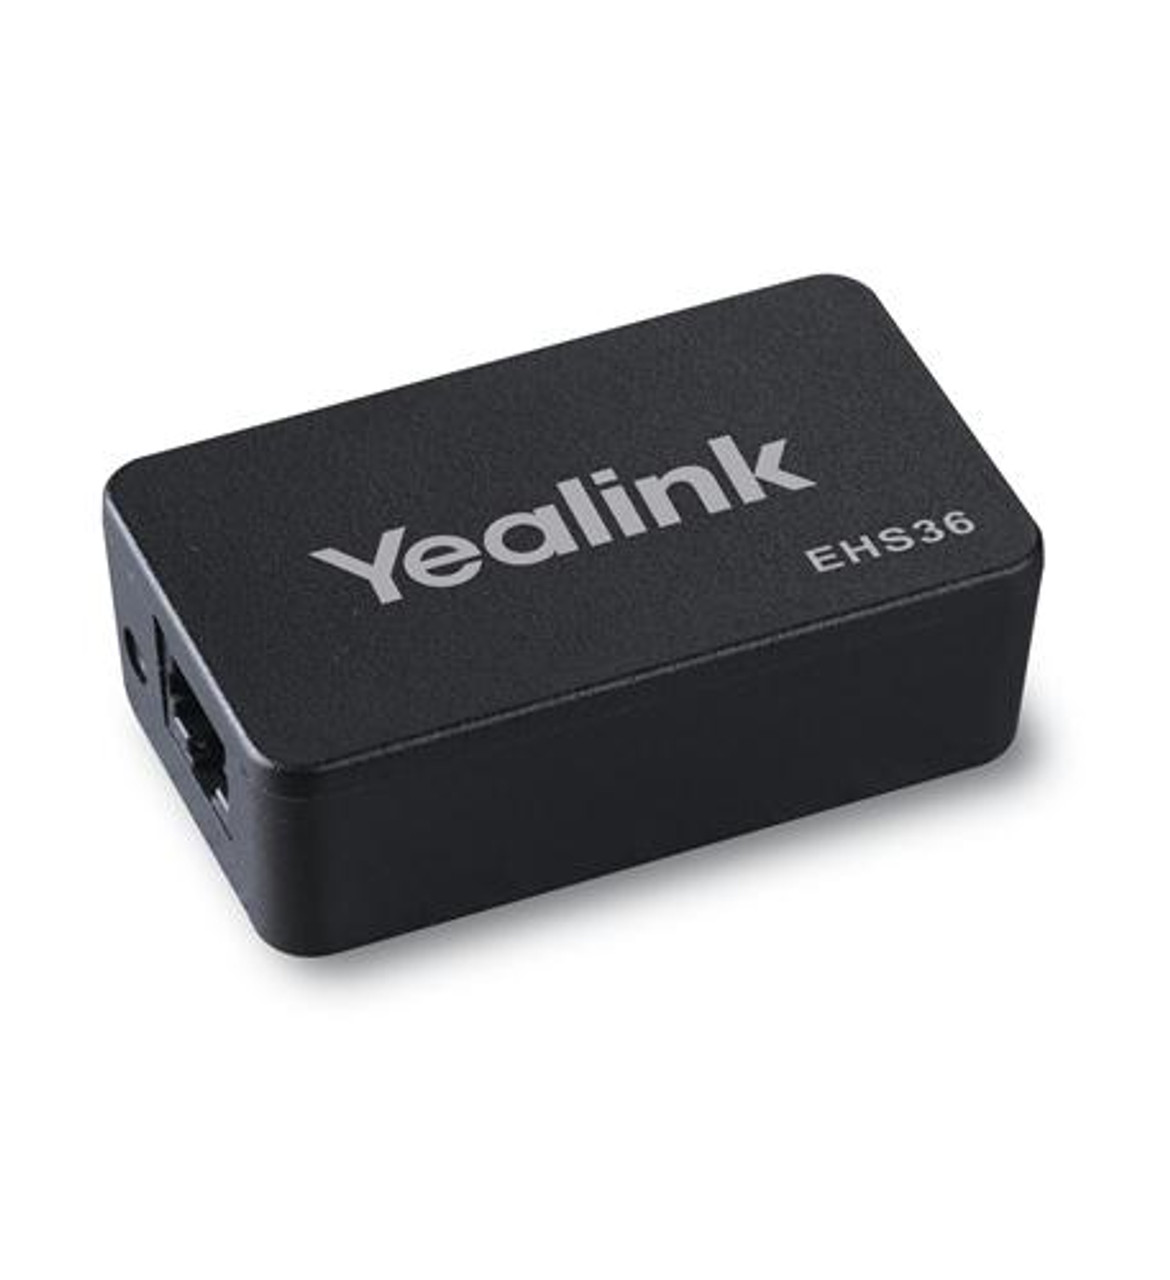 Headset Adapter
Supports Yealink SIP-T27G/T29G/T27P/T40P/T41P/T41S/T42S/T42G/T42S/T43W/T46G/T46S/T48G/T48S/T53/T53W/T54W/T57W/T58A/VP59 IP Phones and a compatible wireless headset
NOTE: YEA-EHS36 is not needed when adding a YEA-WH6X headset to a Yealink SIP phone
Full compatibility with Jabra, Plantronics and Sennheiser
Phone control through a wireless headset
Plug-and-play, easy to use